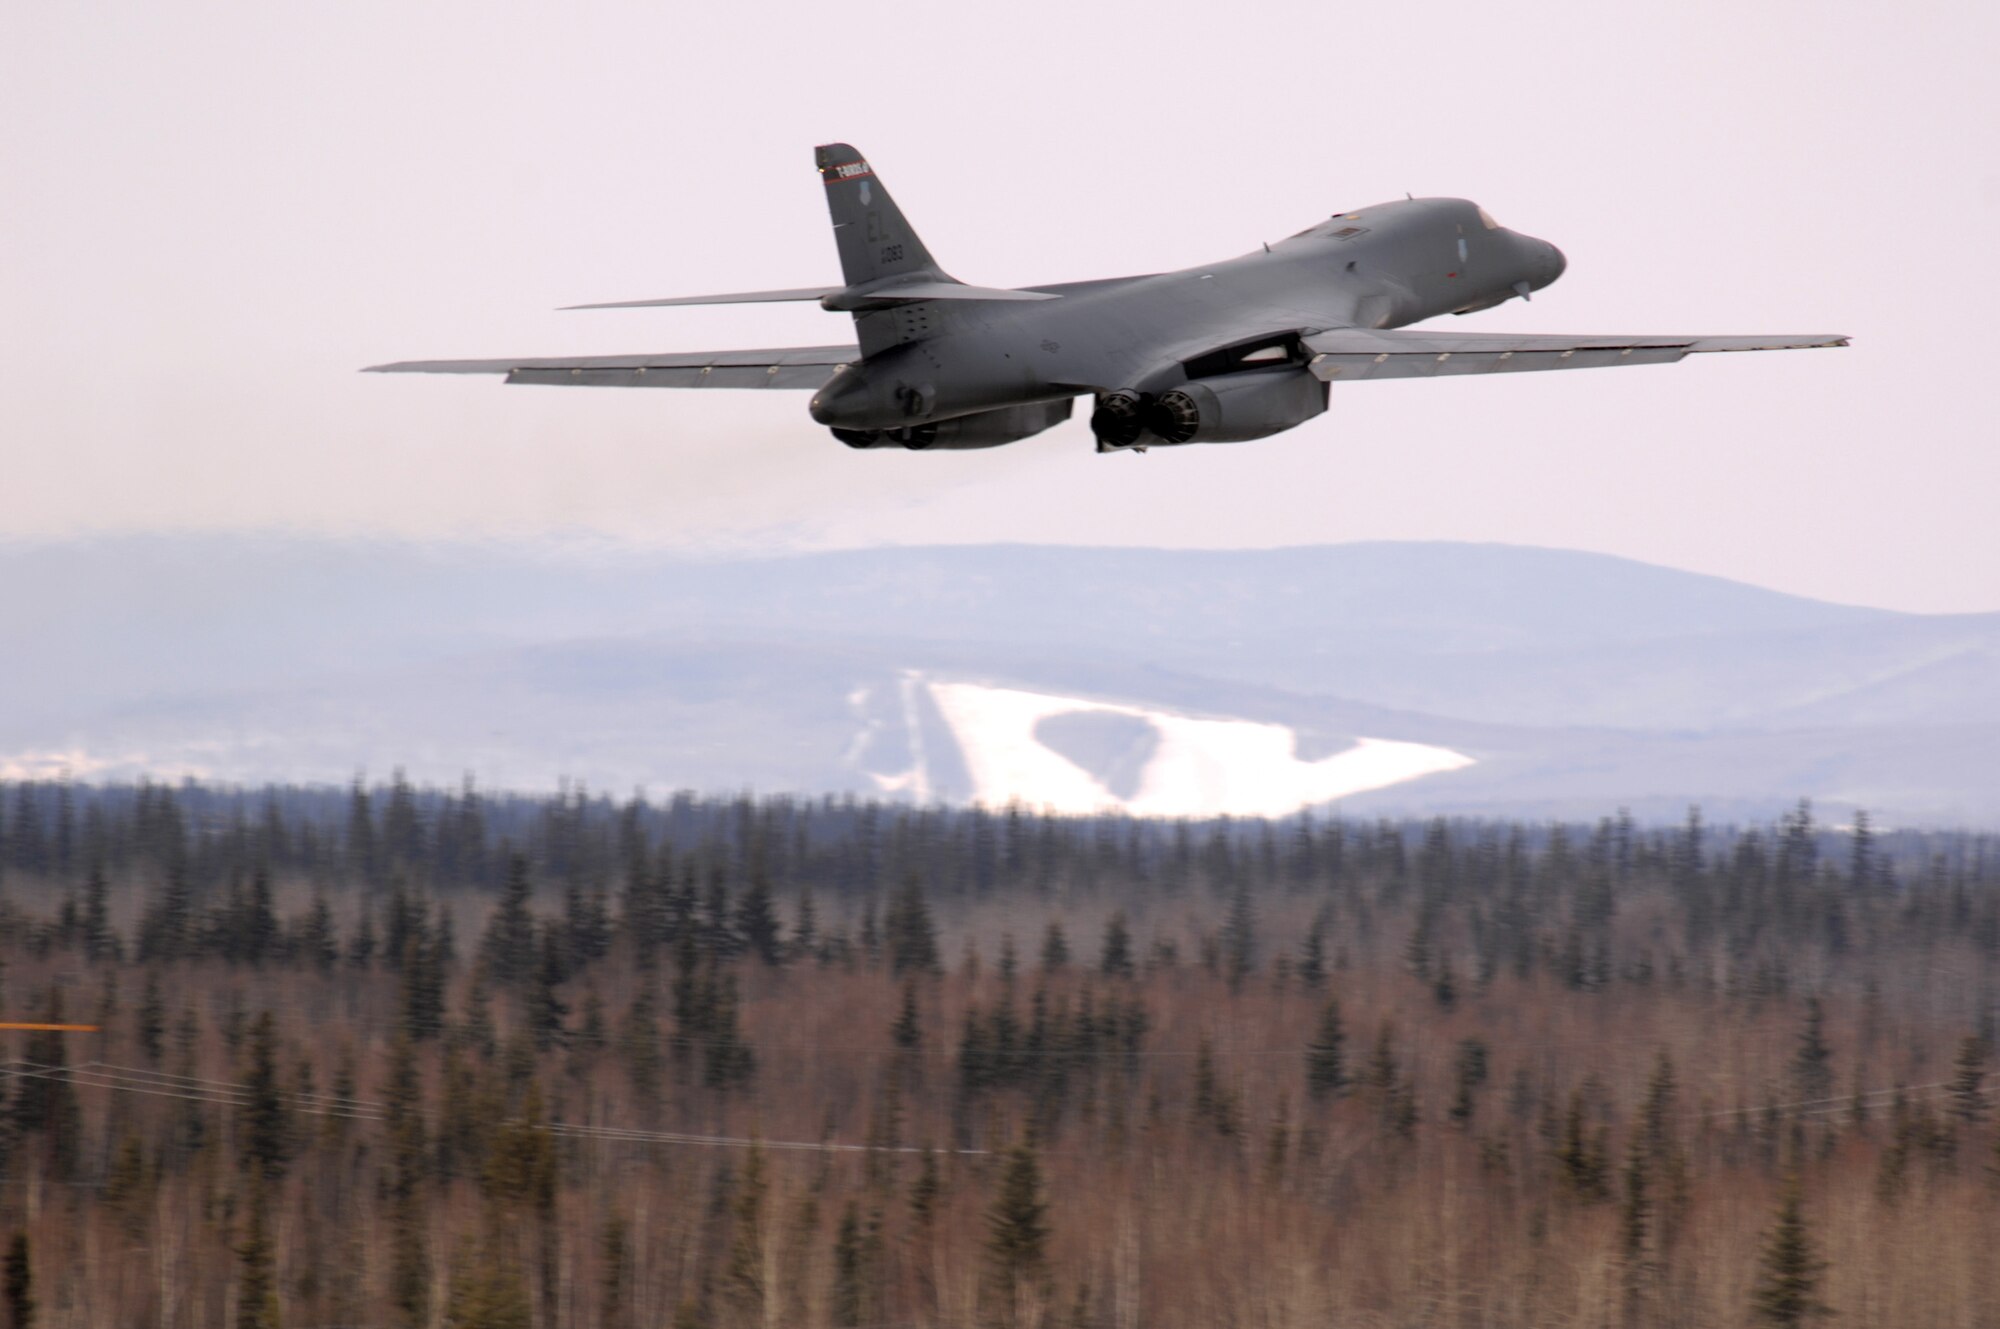 EIELSON AIR FORCE BASE, Alaska -- A B-1B Lancer from Ellsworth Air Force Base, South Dakota, performs a touch and go before landing here on April 3 for Red Flag-Alaska 07-1. Red Flag-Alaska allows aircrews to practice large-scale combat missions. The exercises are conducted on the Pacific Alaskan Range Complex with air operations flown out of Eielson and Elmendorf Air Force bases. (U.S. Air Force Photo by Staff Sgt Joshua Strang)